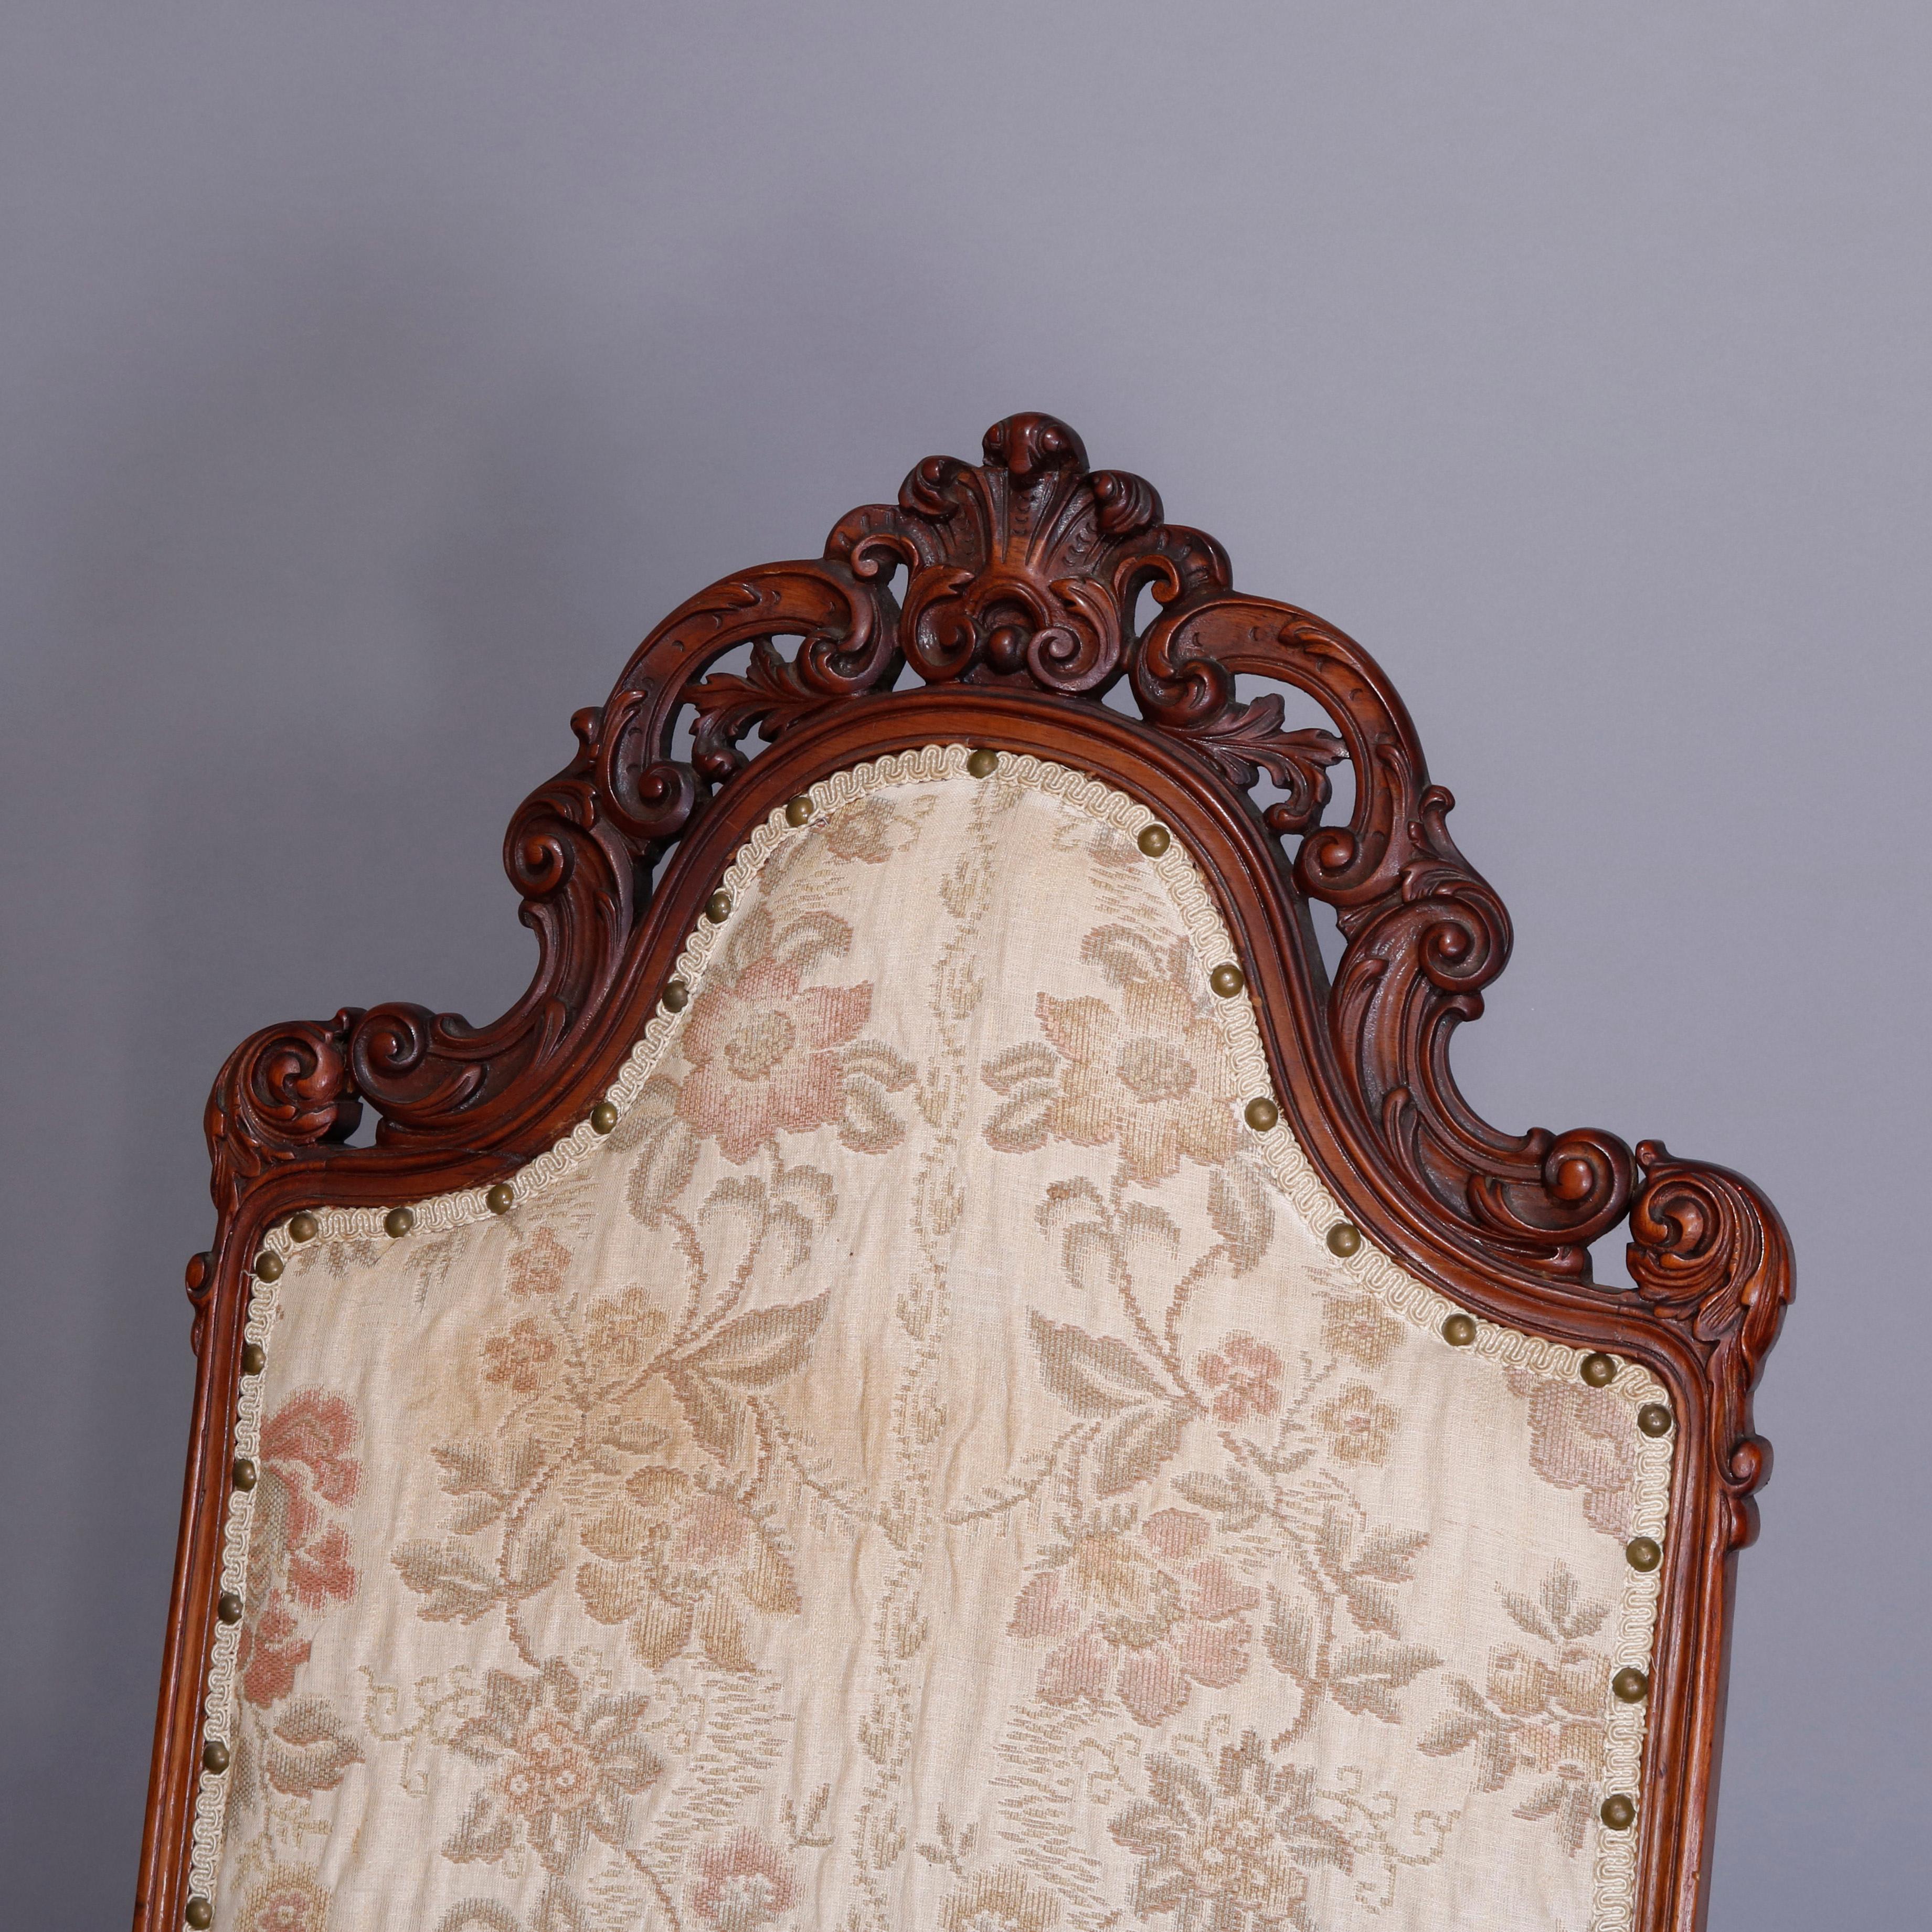 An antique Victorian Baroque style figural throne chair offers carved walnut frame with tall back having pierced scroll and foliate crest surmounting upholstered back and seat with arms terminating in carved lion heads, apron with carved and pierced